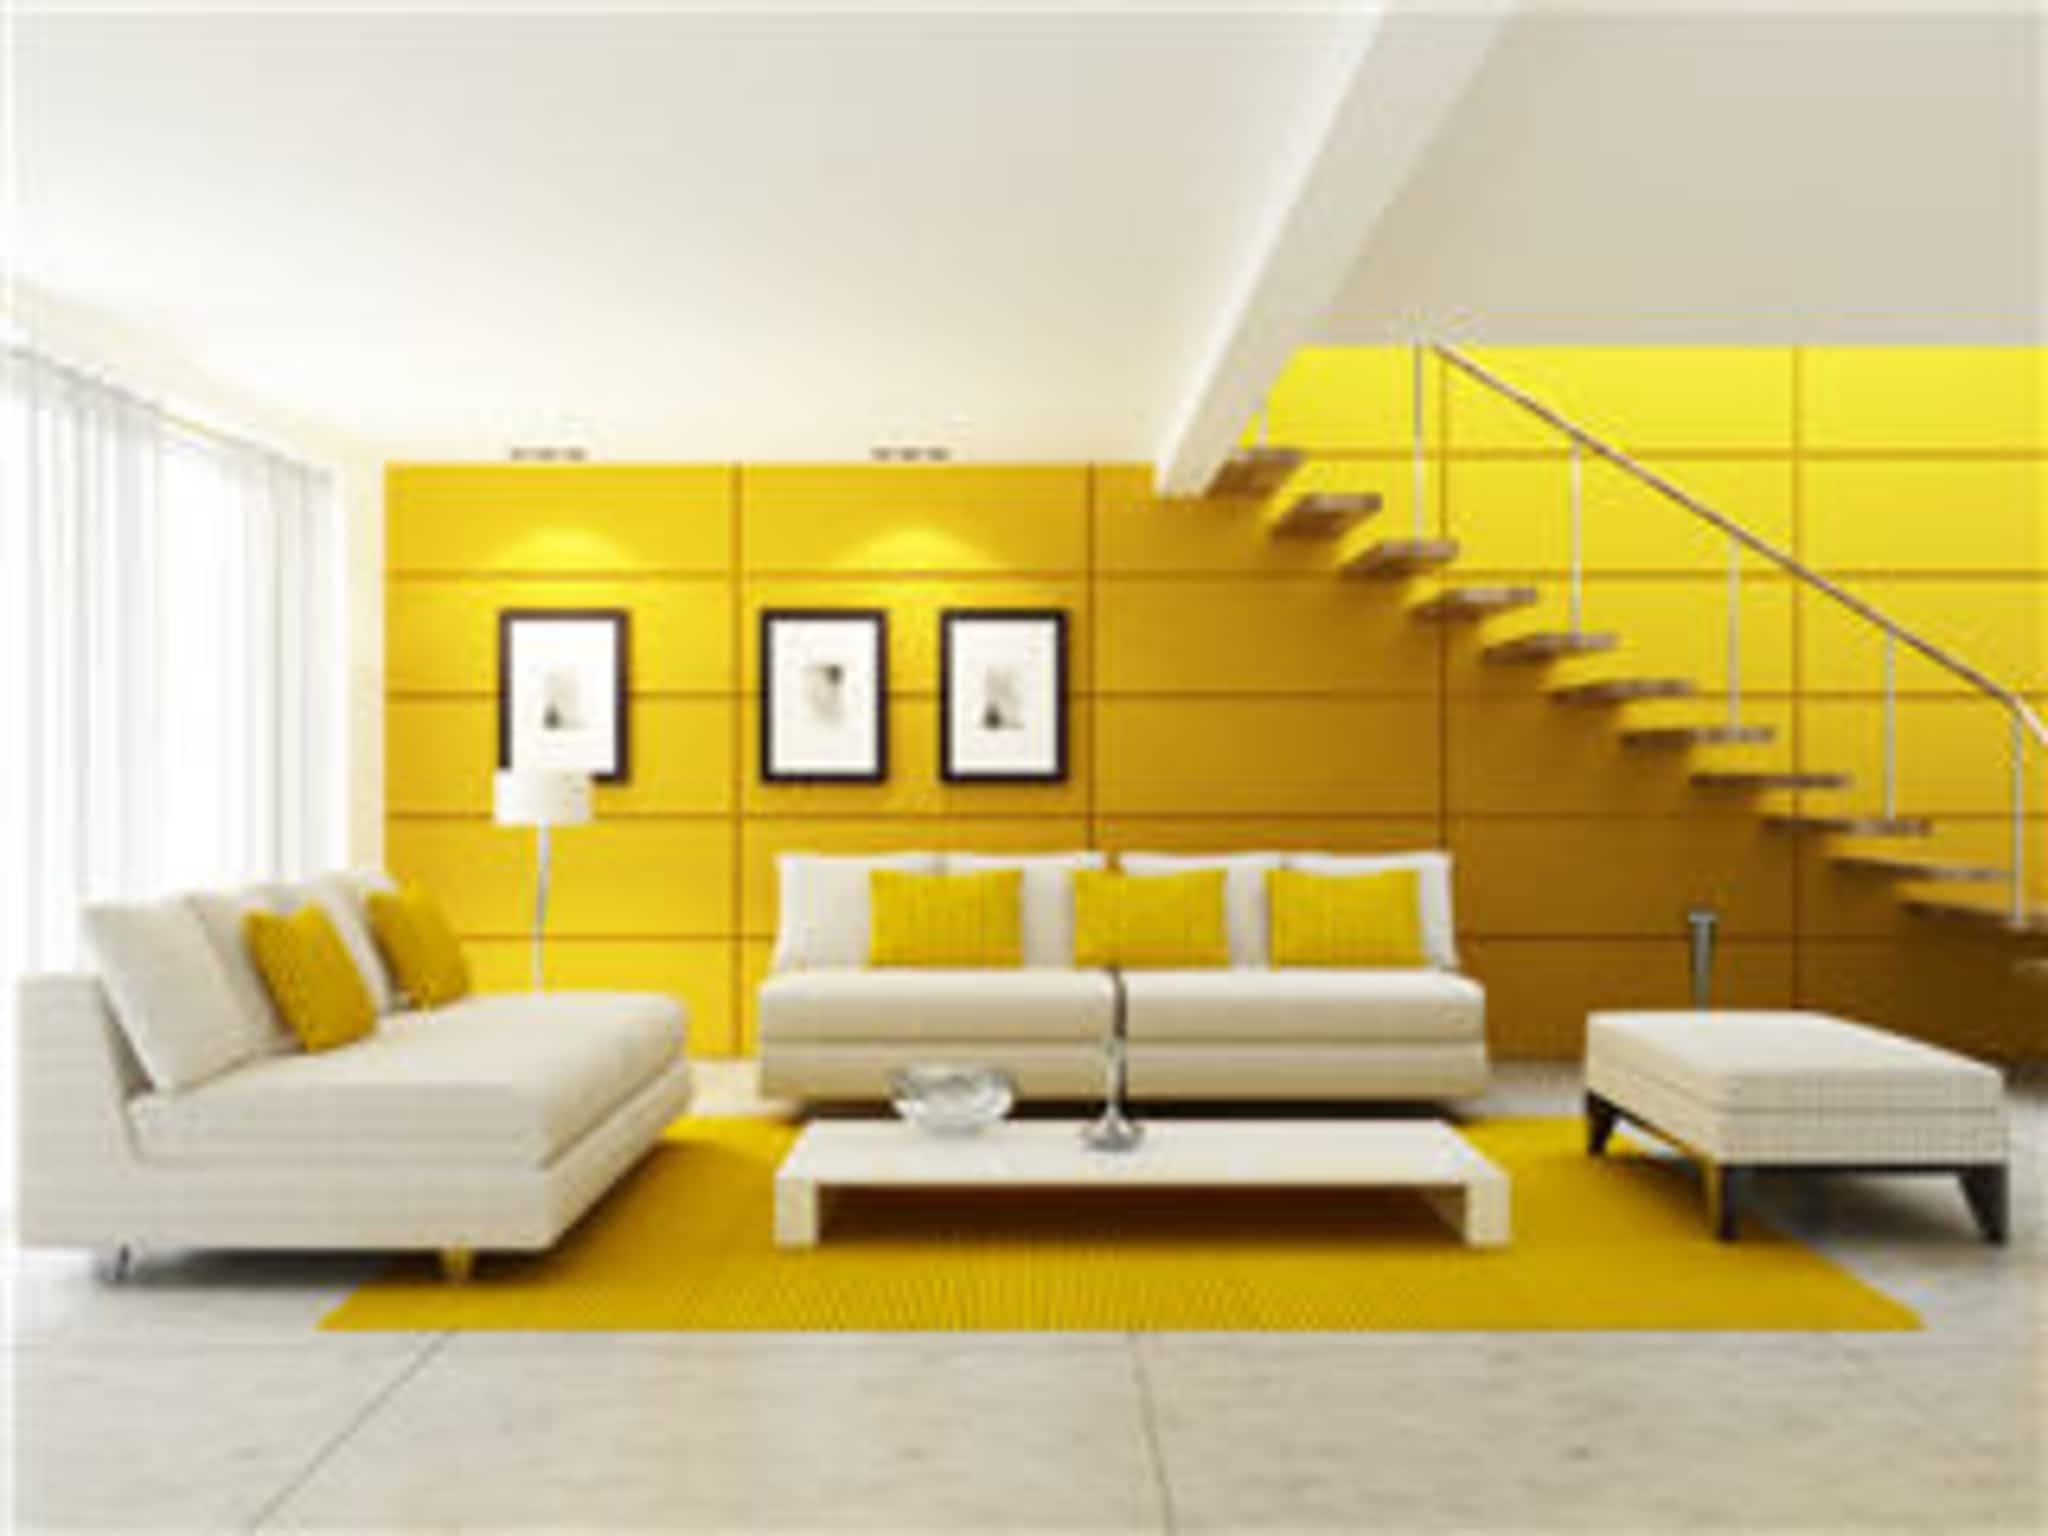 photo Strictly Residential Professional Painting Services